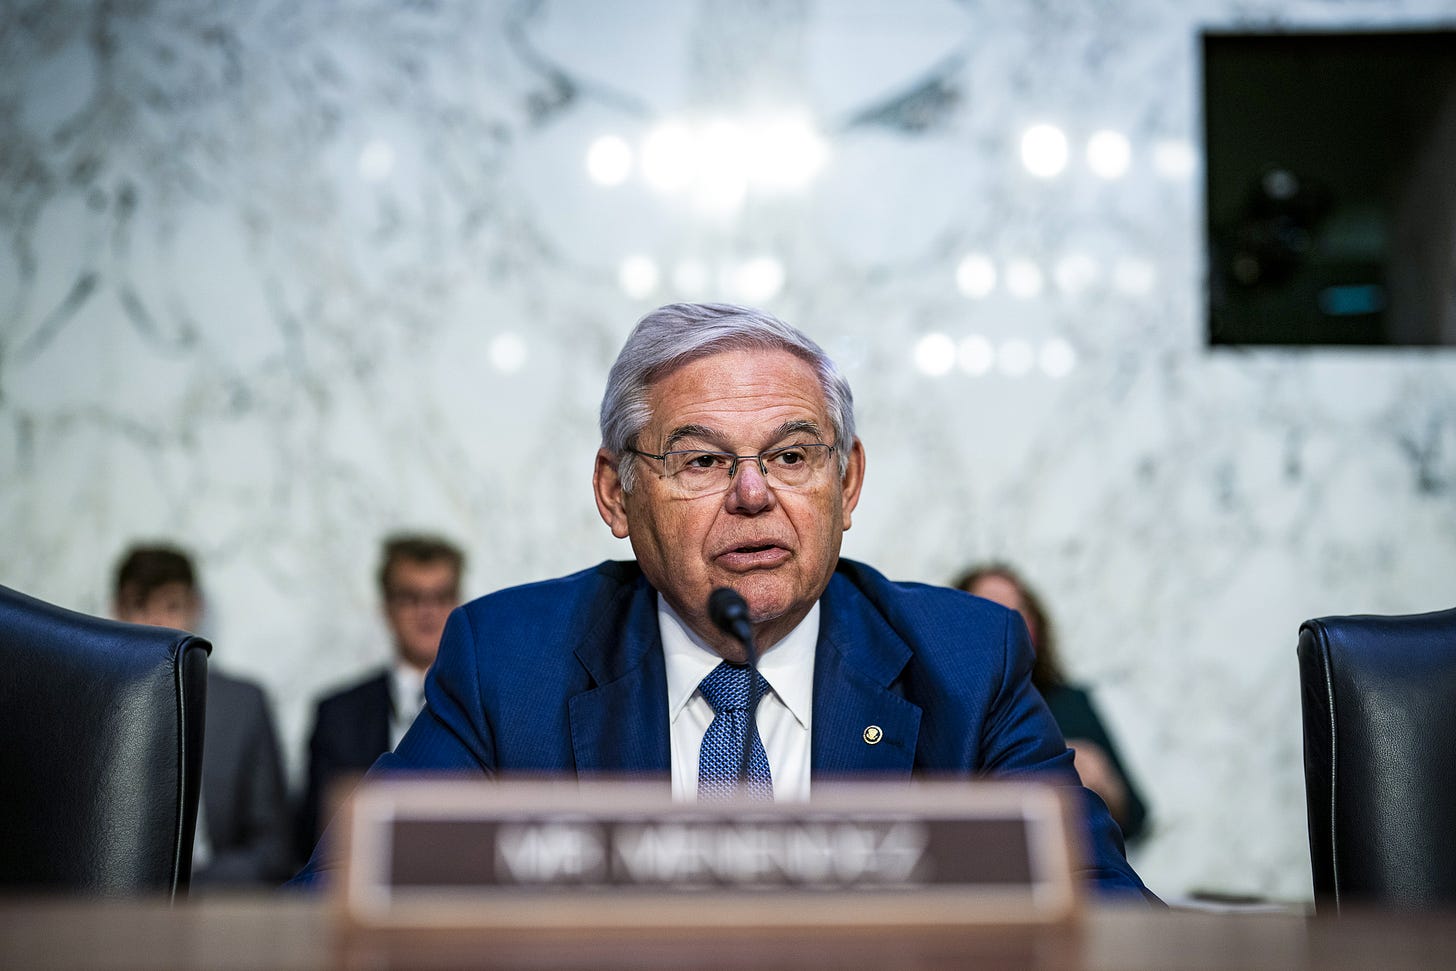 Feds investigating if Menendez and wife got gifts including D.C. apartment,  Mercedes and jewelry